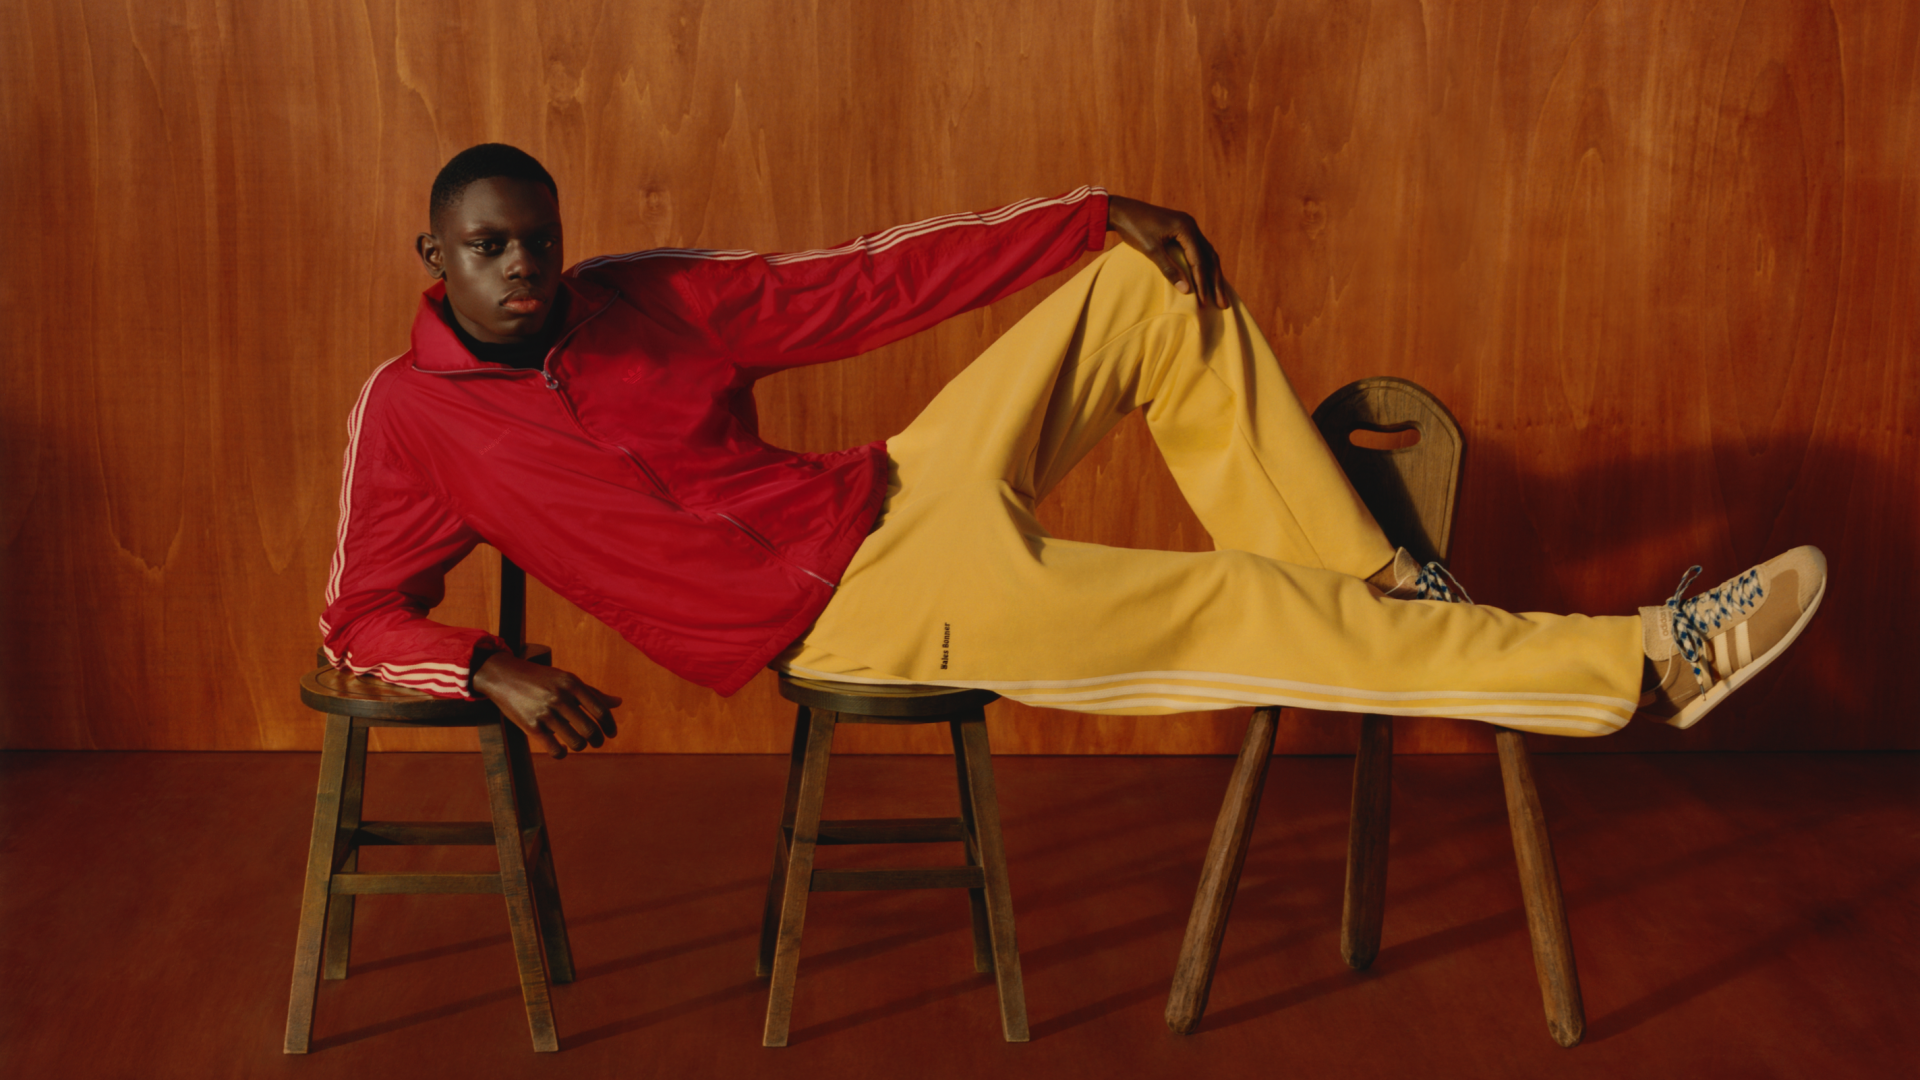 Wales Bonner & Adidas Continue Their Ongoing Collaboration With S/S 22′ Collection